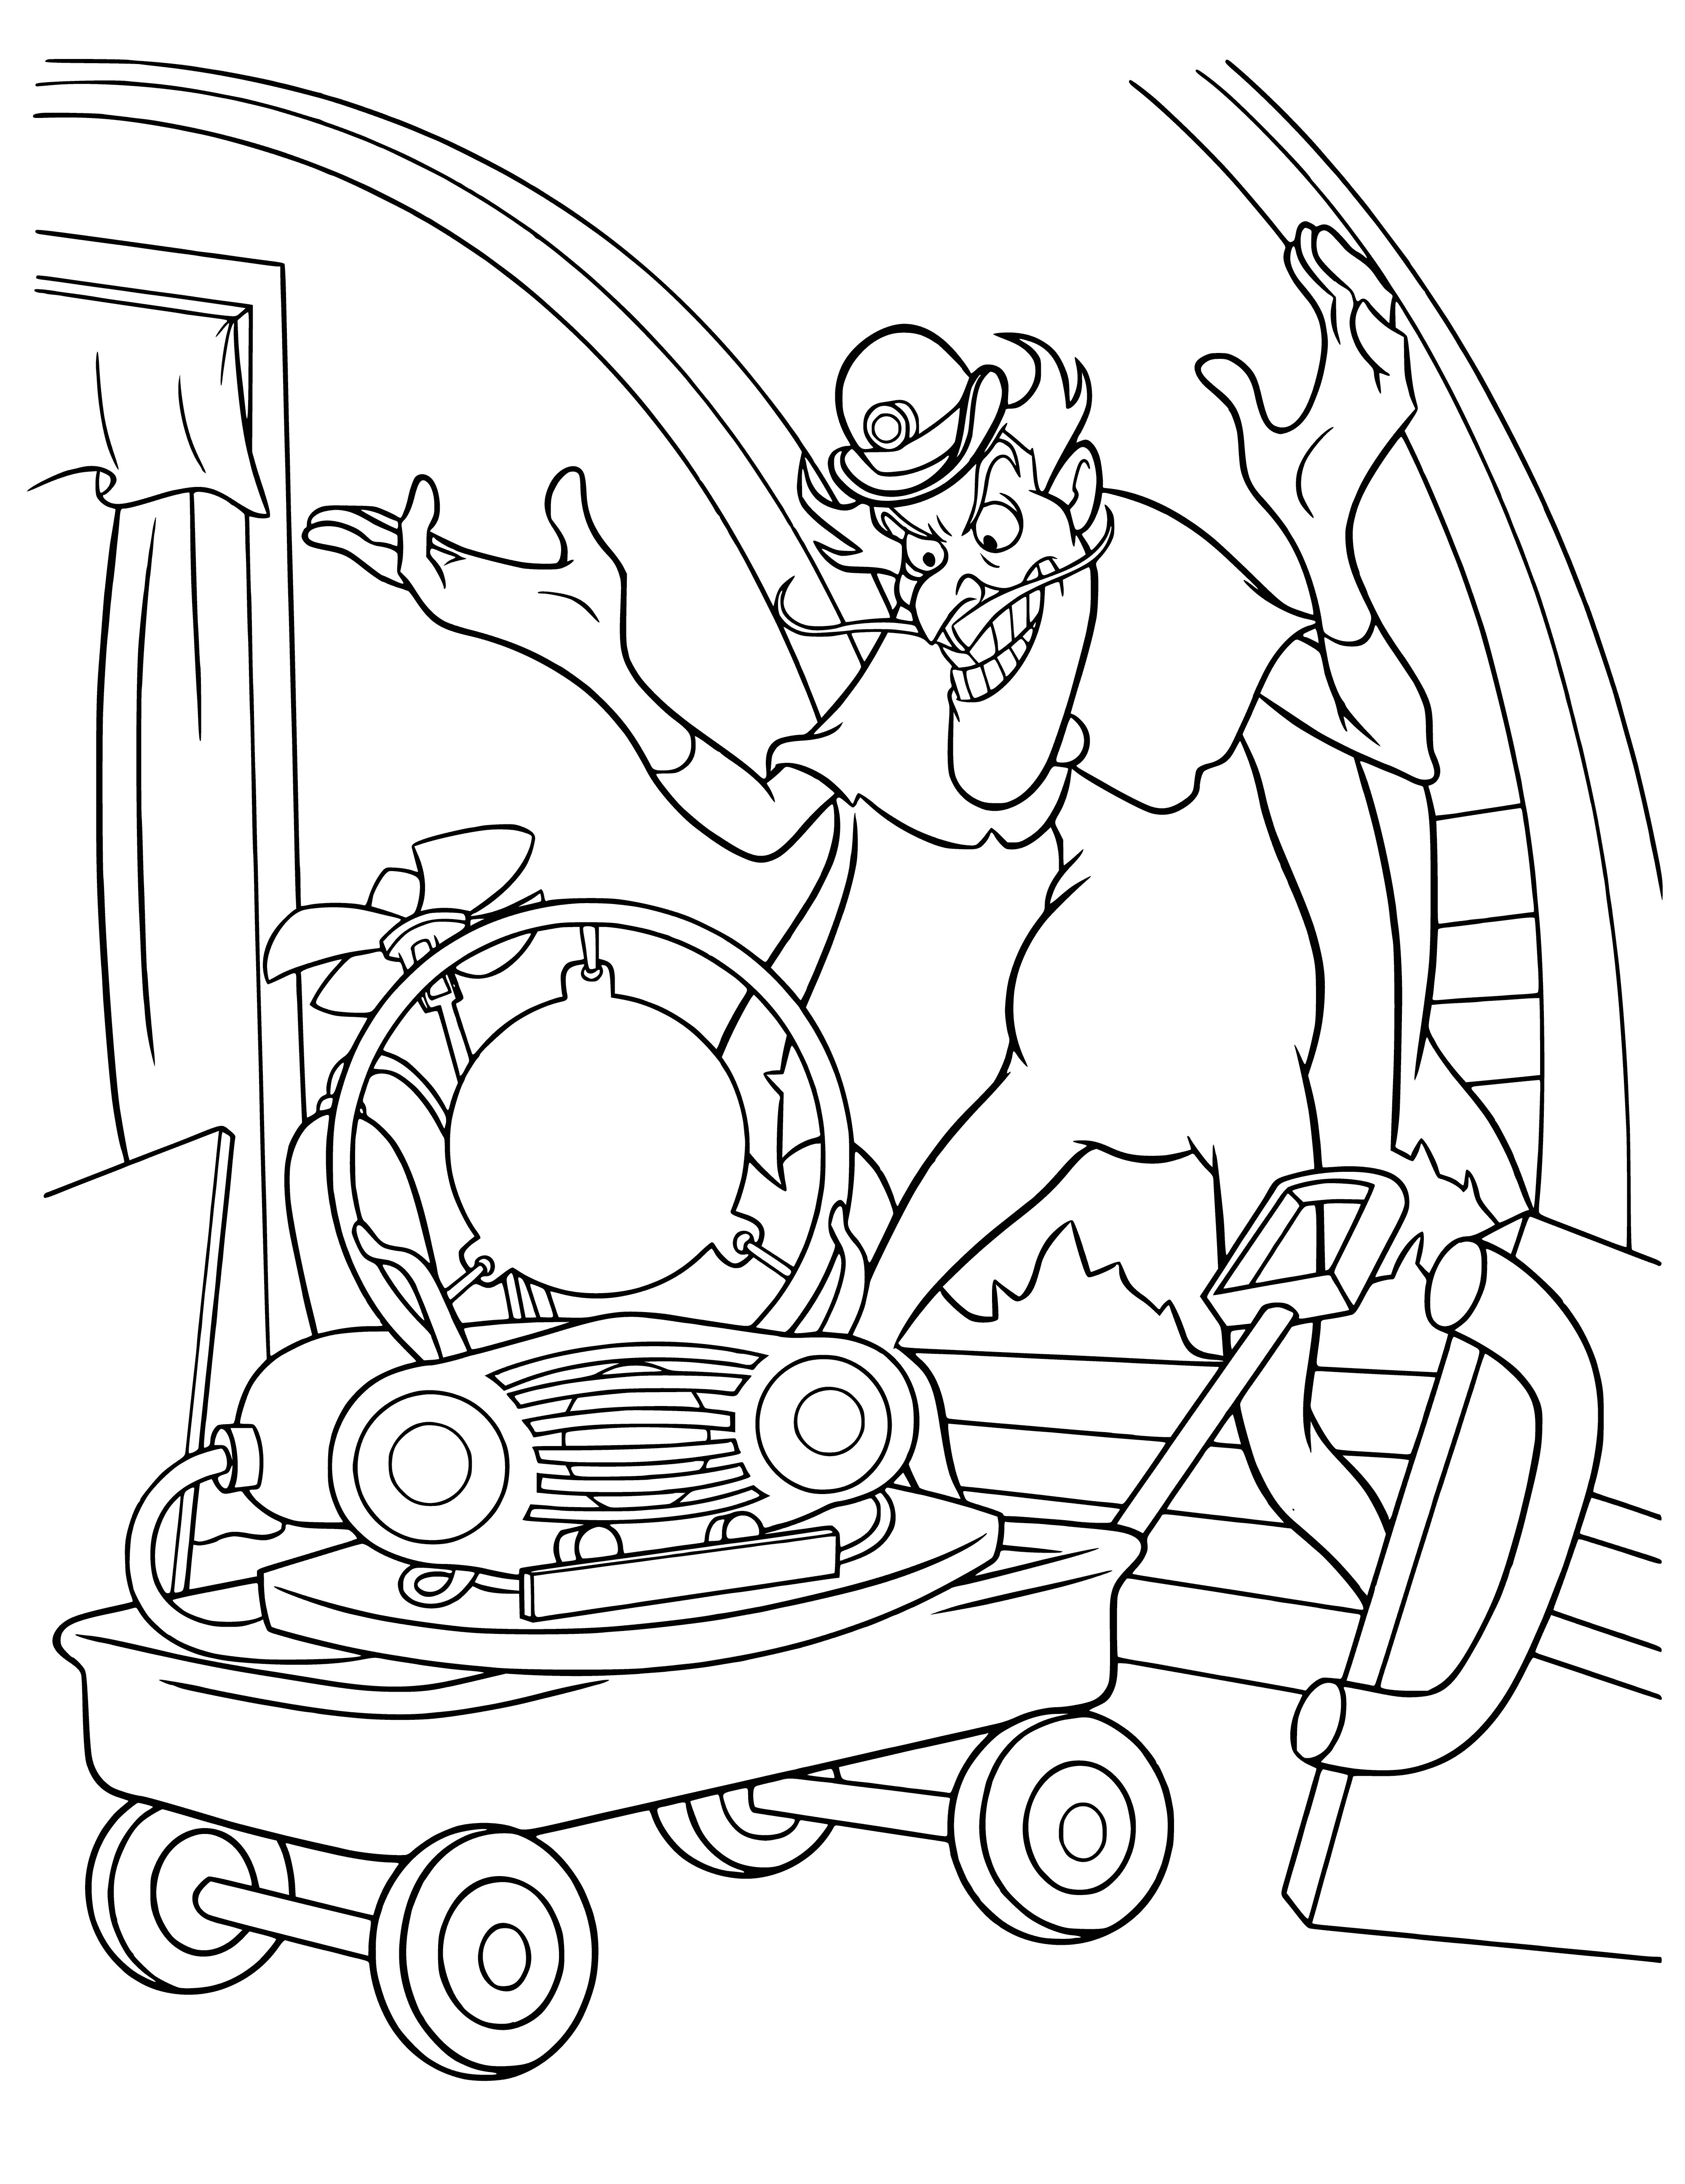 coloring page: Villain steals apparatus and runs away with it in coloring page.